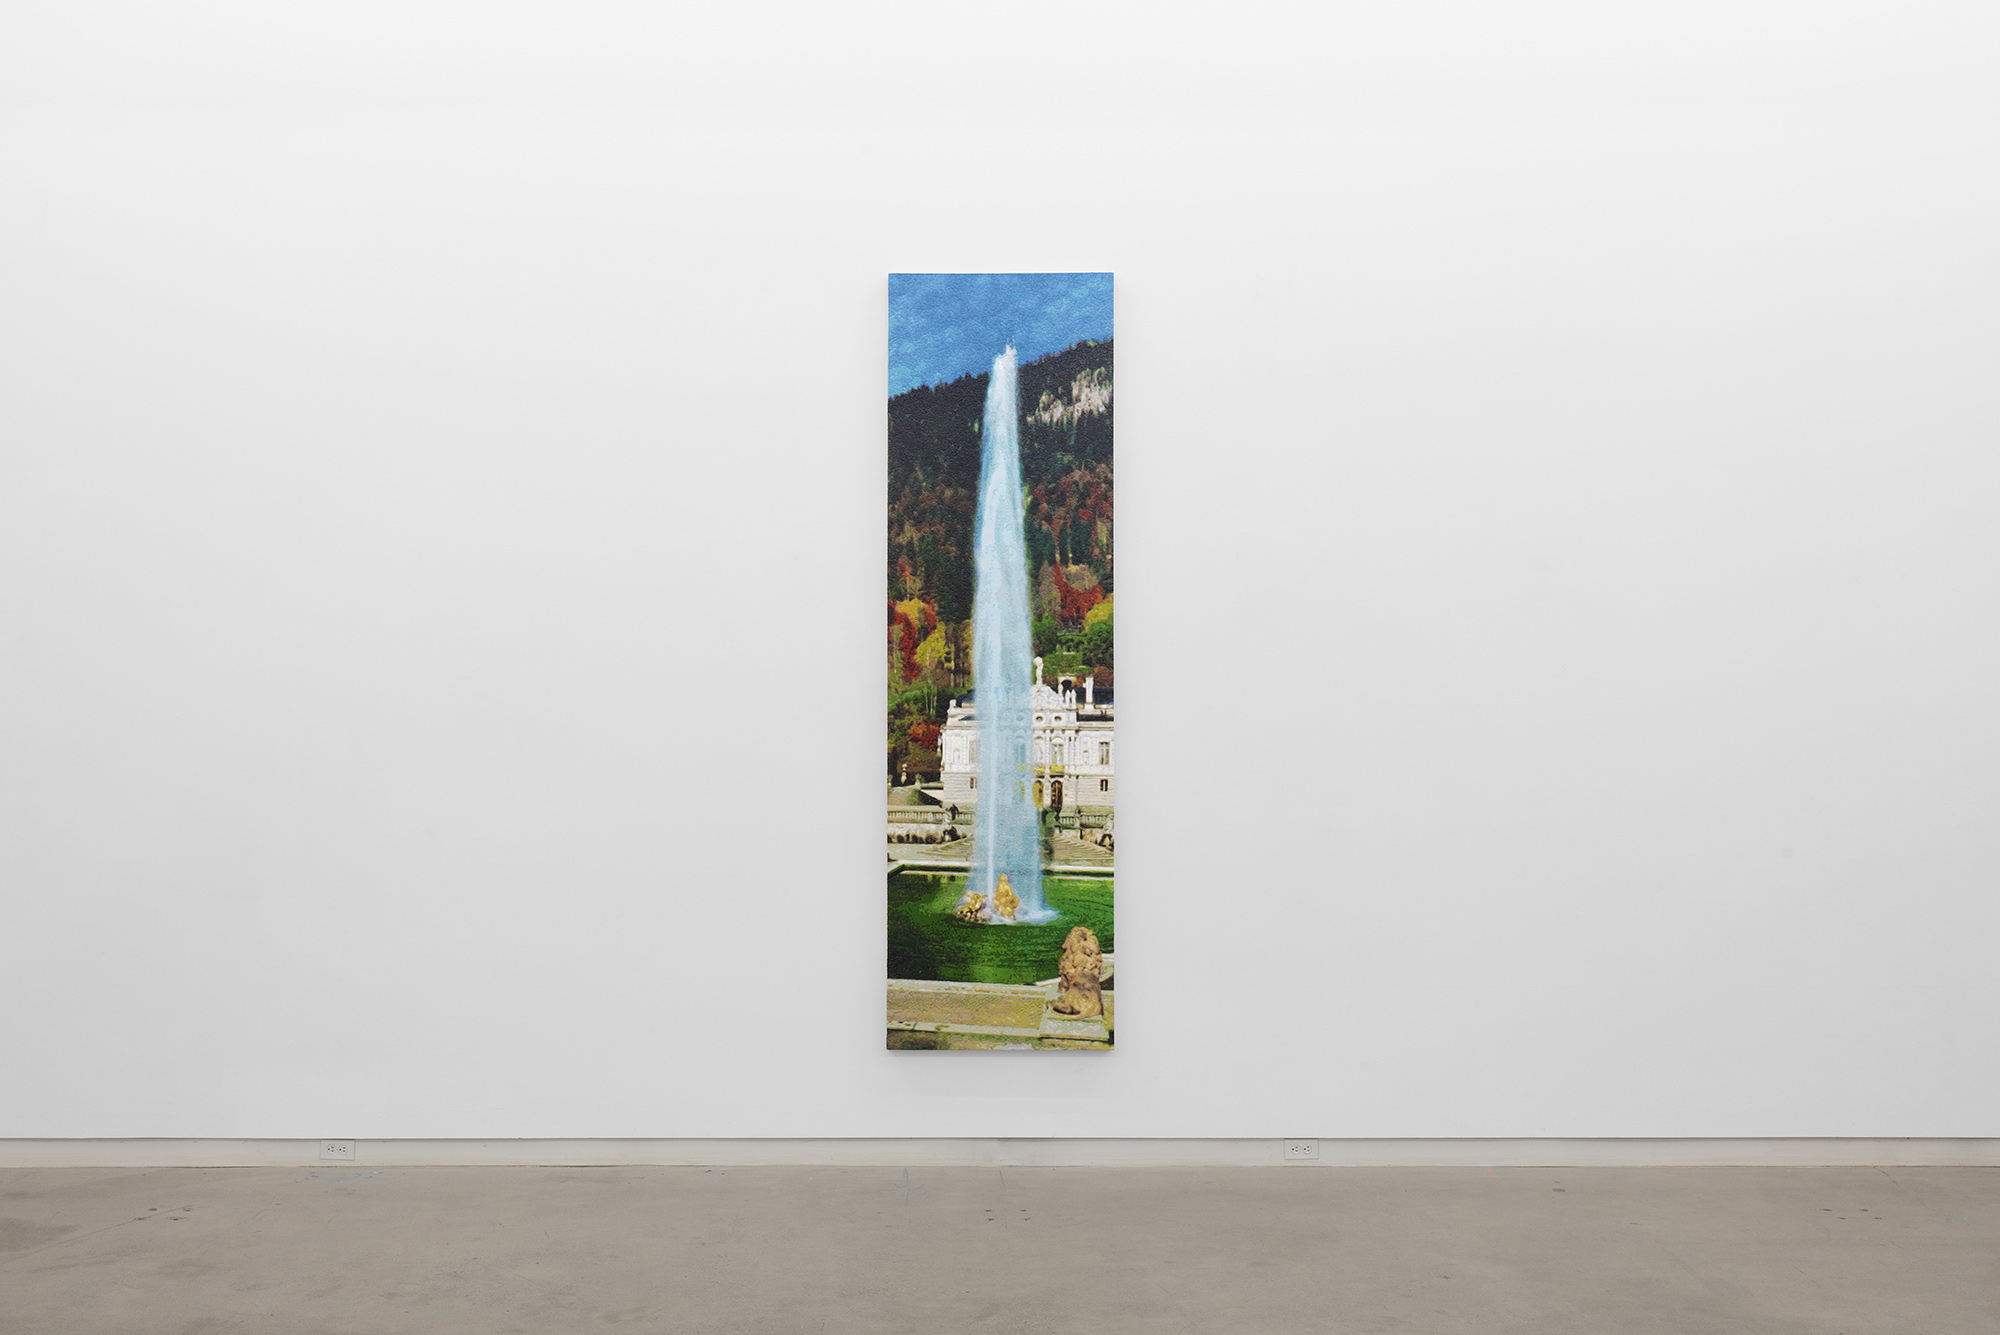  Dorian FitzGerald,  Fountain In Bavaria, Schloss Linderhof, For Ludwig II,  2019, acrylic on canvas mounted to board, 103 x 30 inches 